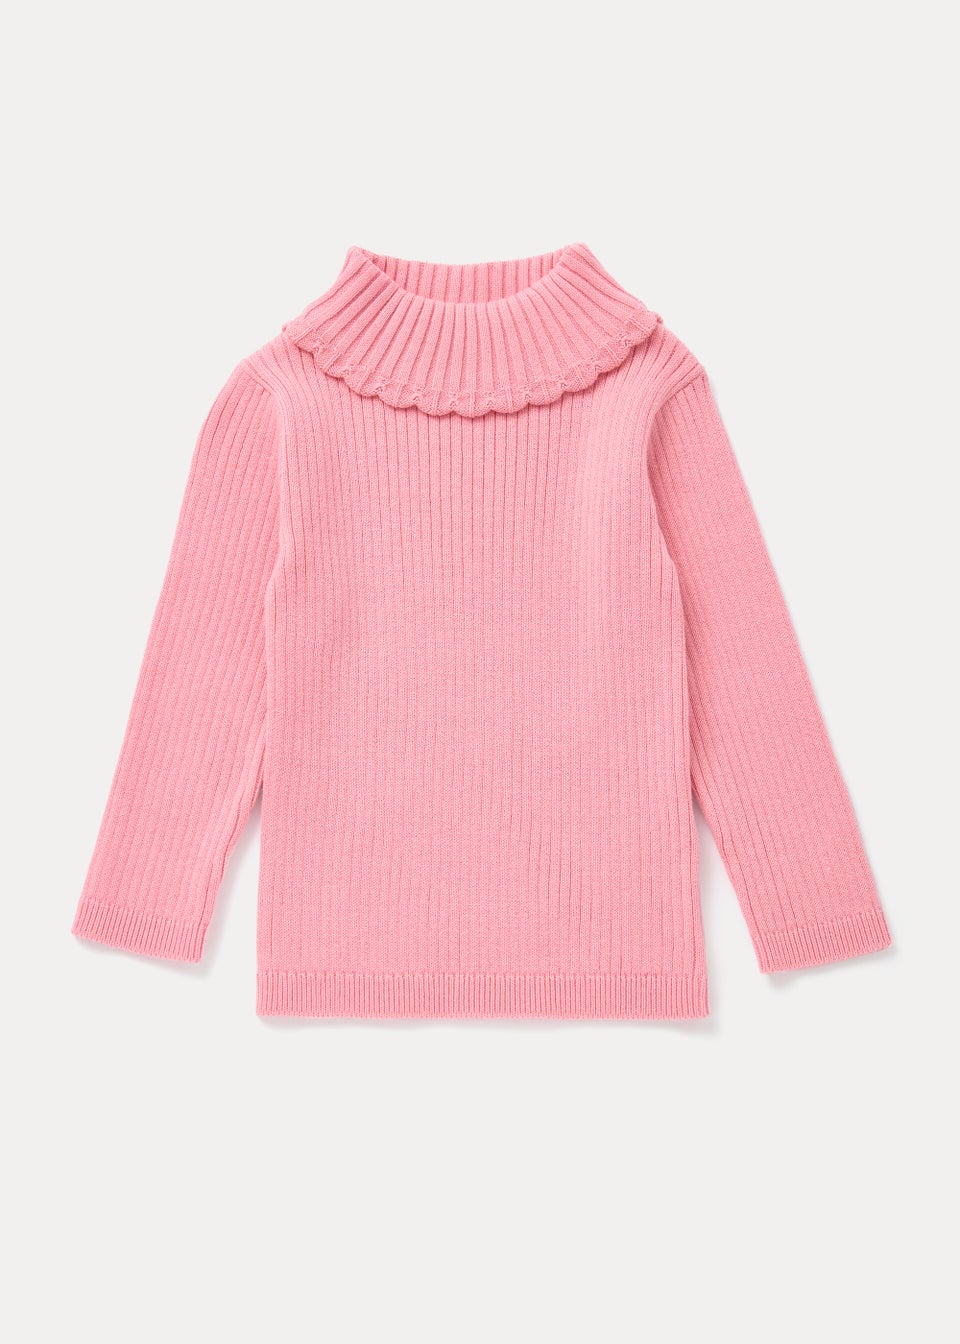 Girls Light Pink Ribbed Roll Neck Top (9mths-6yrs)